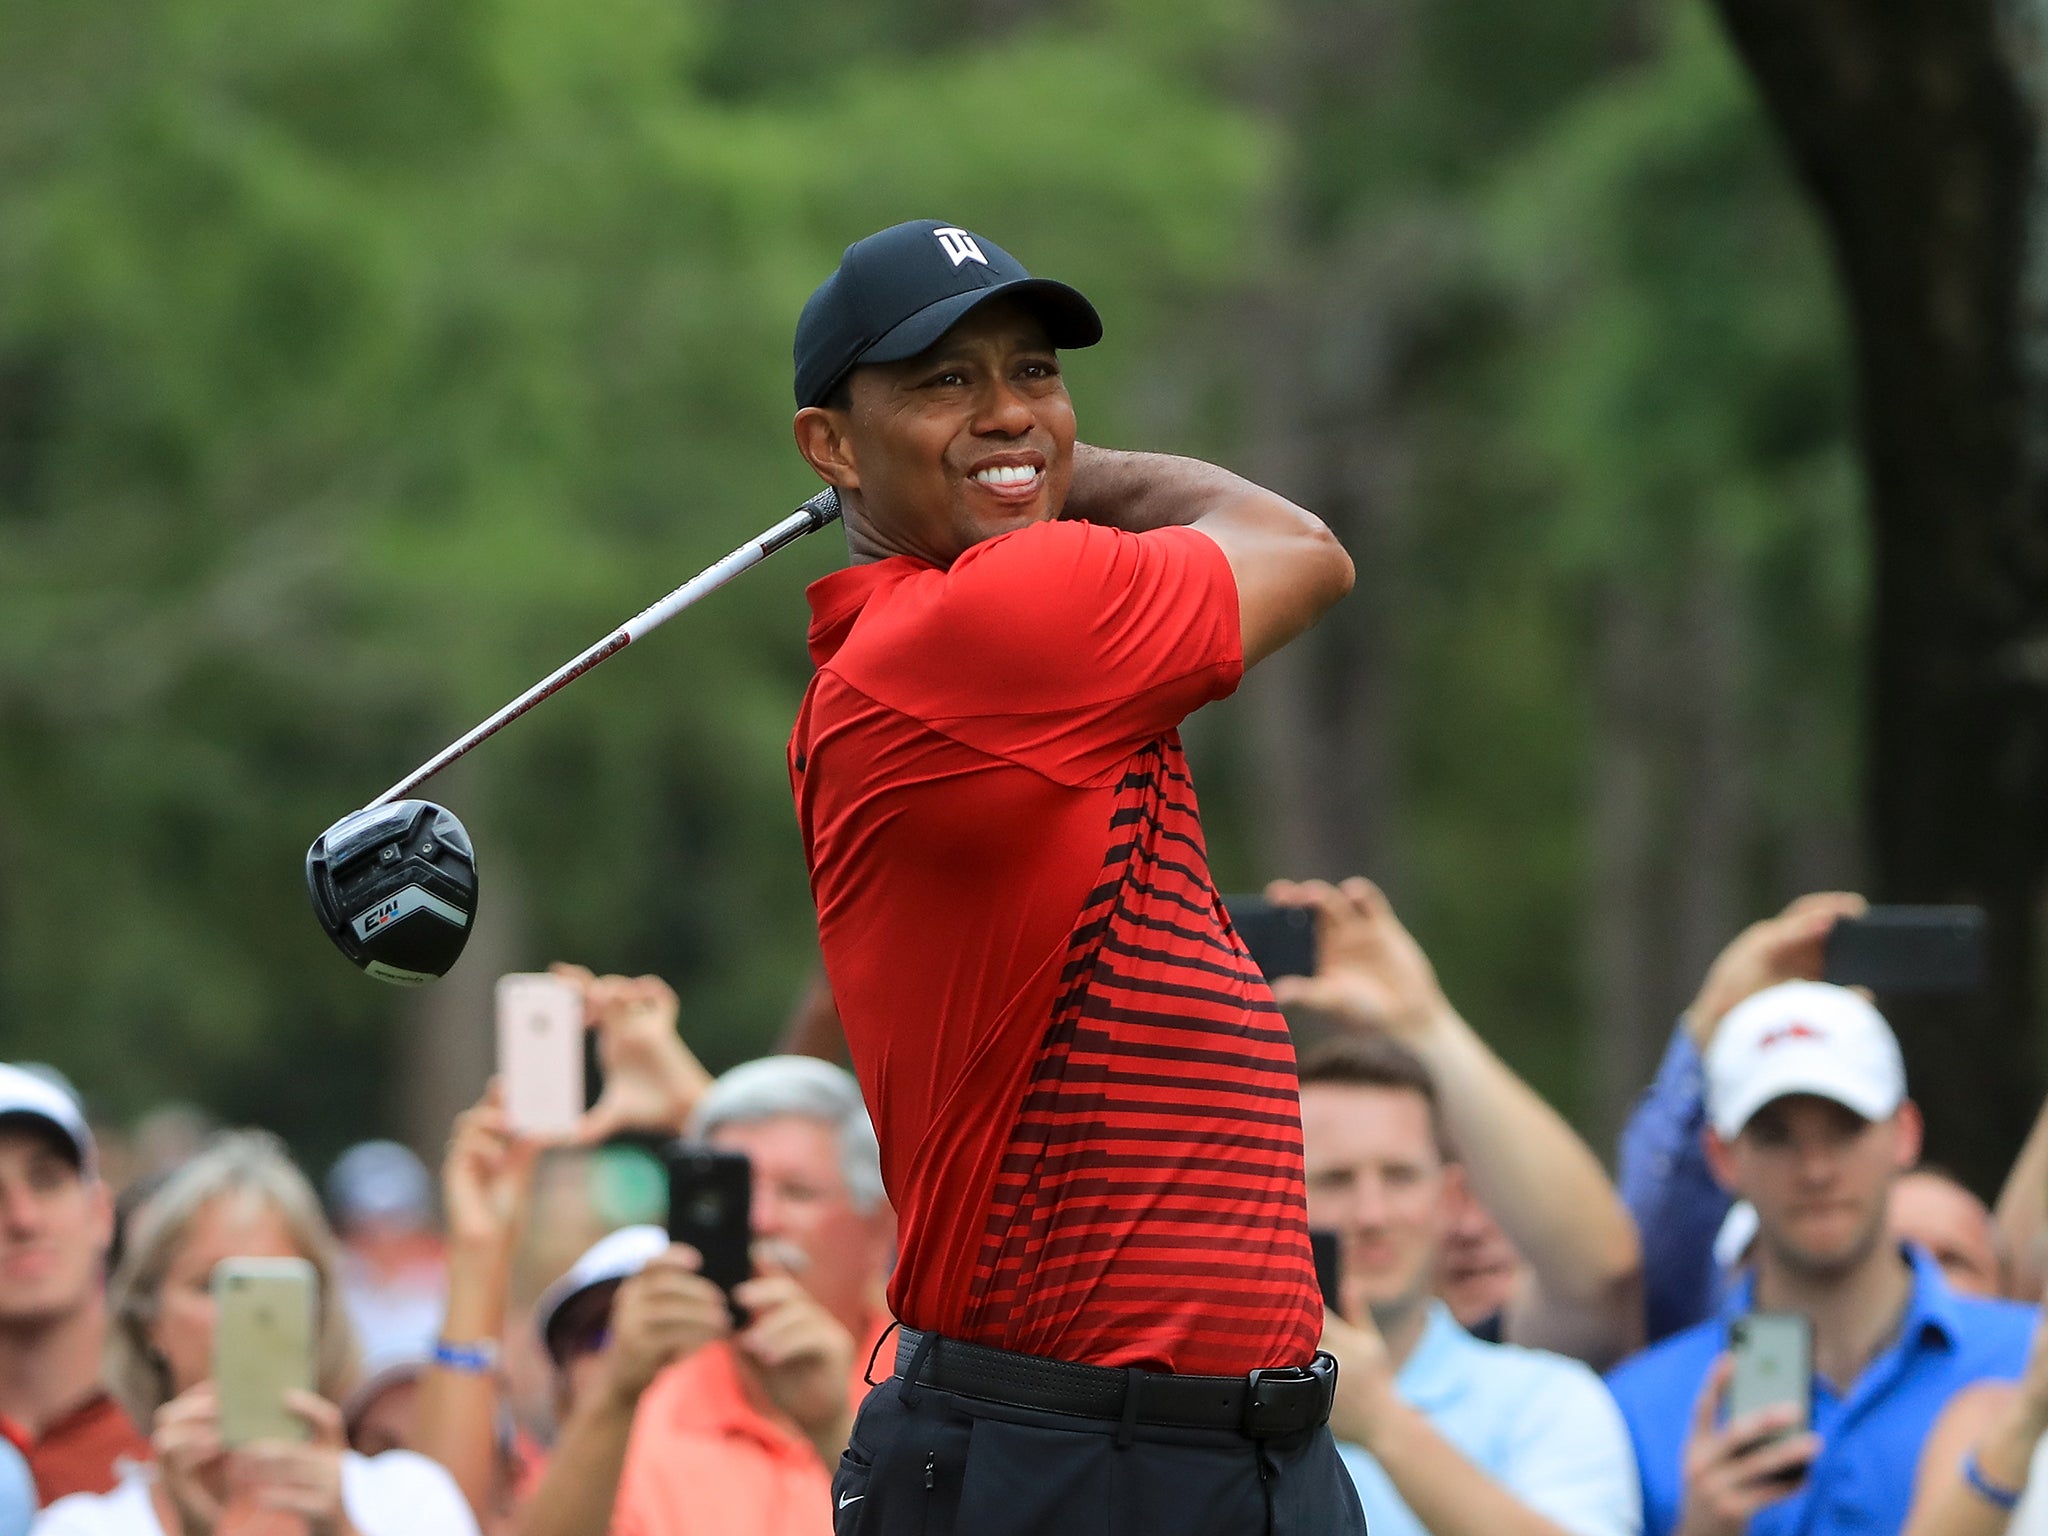 Tiger Woods’ swing has become more upright